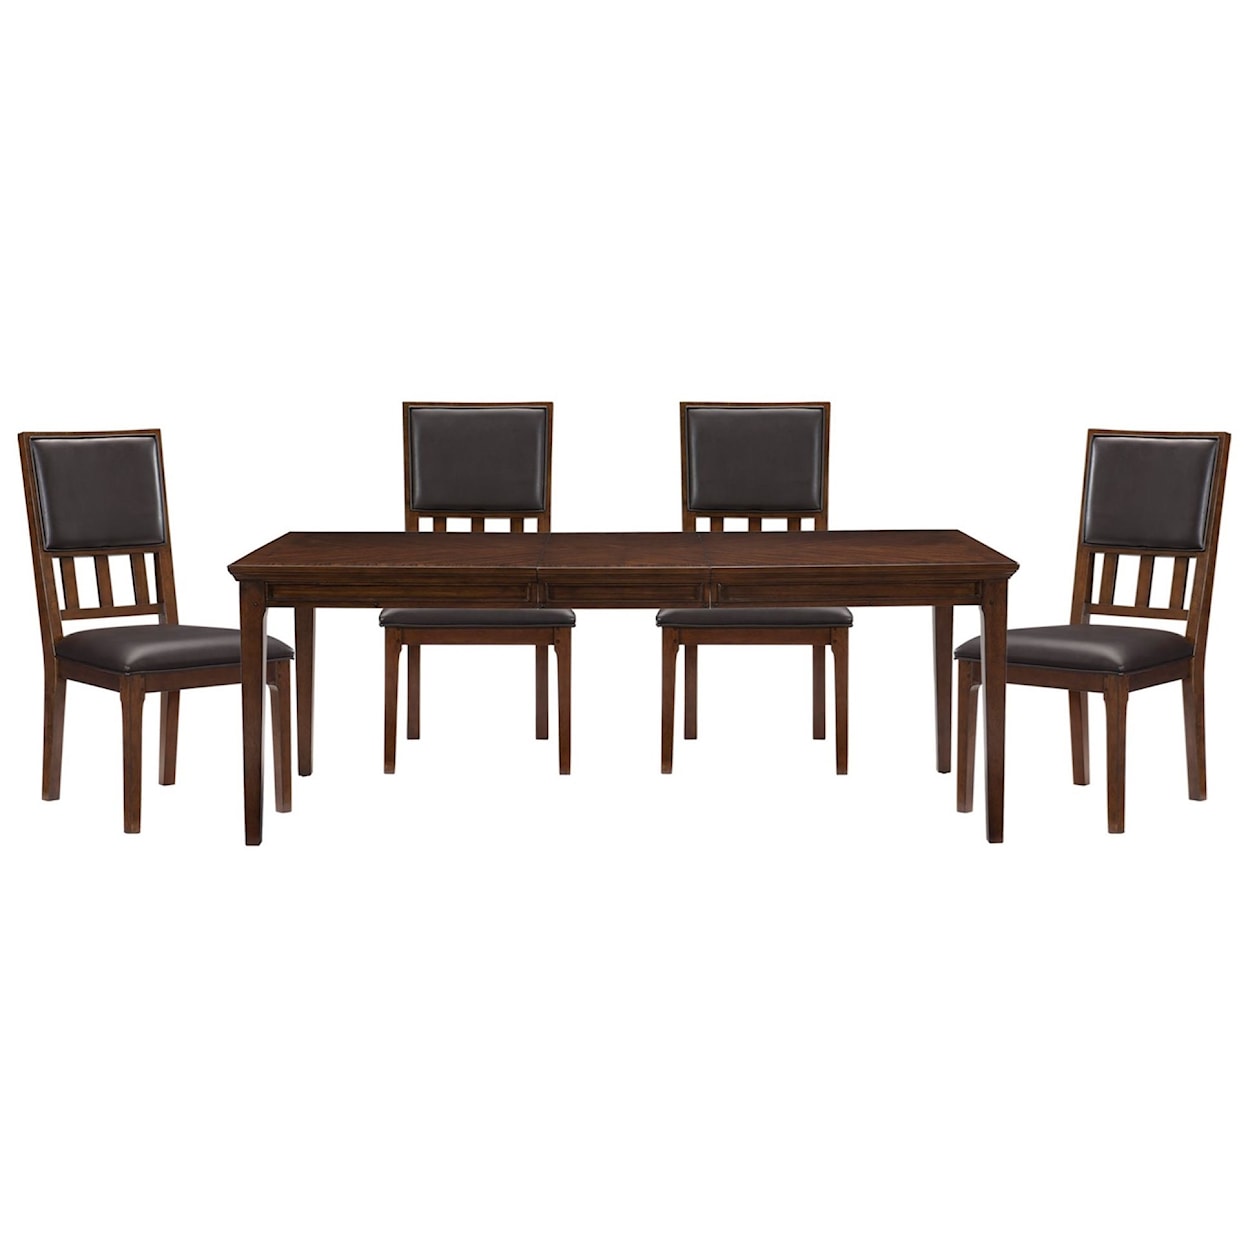 Homelegance Furniture Frazier Park 5-Piece Table and Chair Set